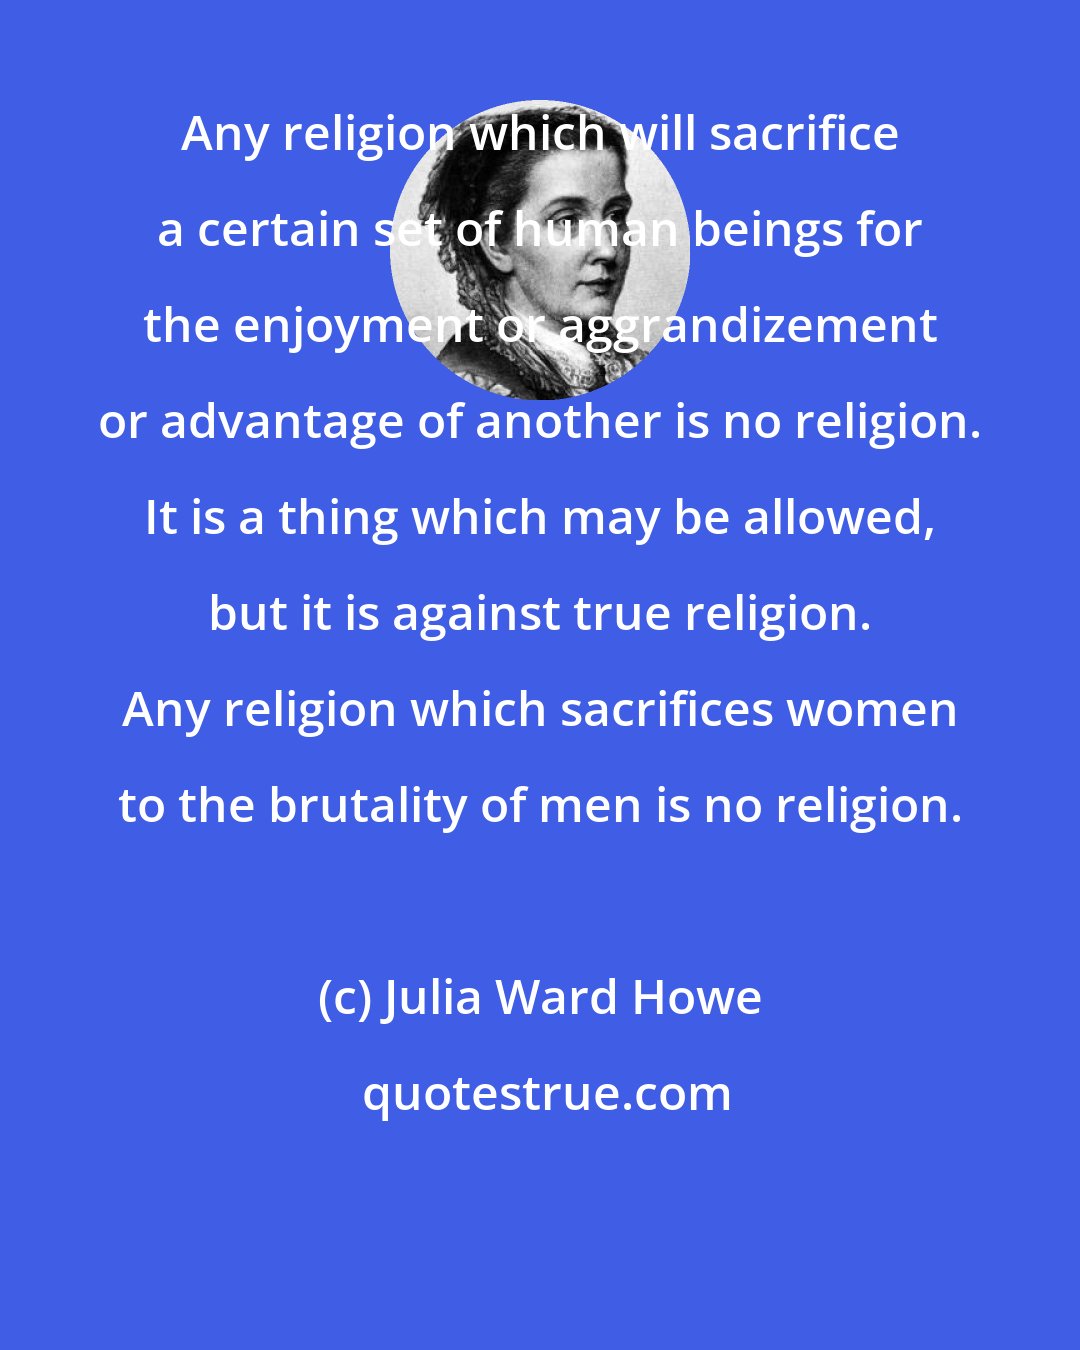 Julia Ward Howe: Any religion which will sacrifice a certain set of human beings for the enjoyment or aggrandizement or advantage of another is no religion. It is a thing which may be allowed, but it is against true religion. Any religion which sacrifices women to the brutality of men is no religion.